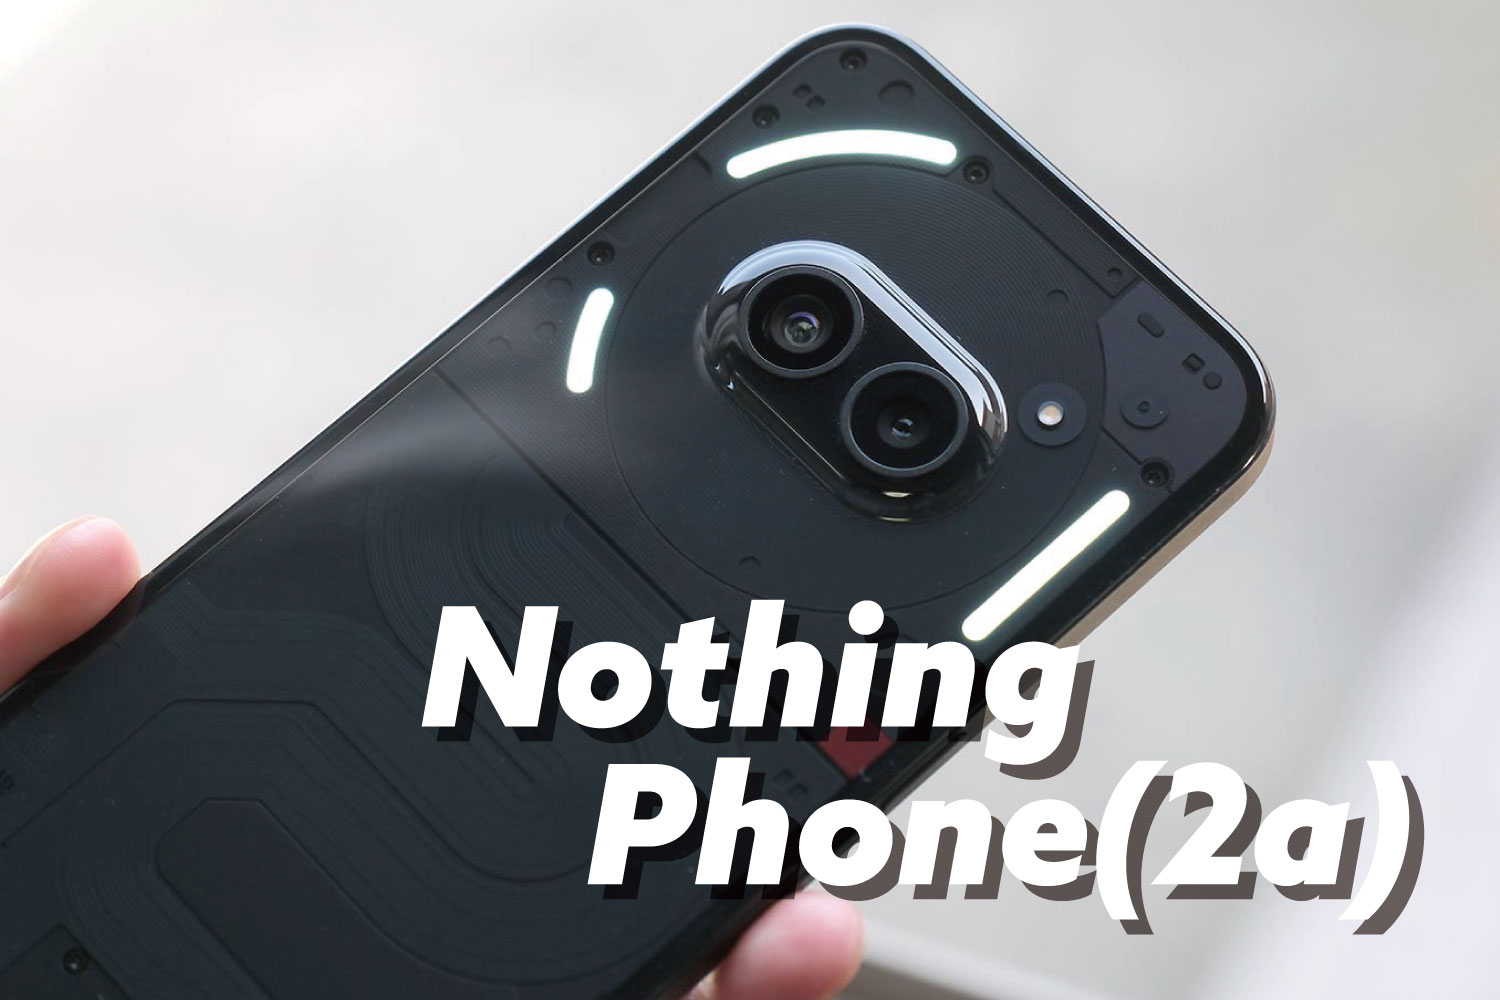 Nothing Phone(2a)